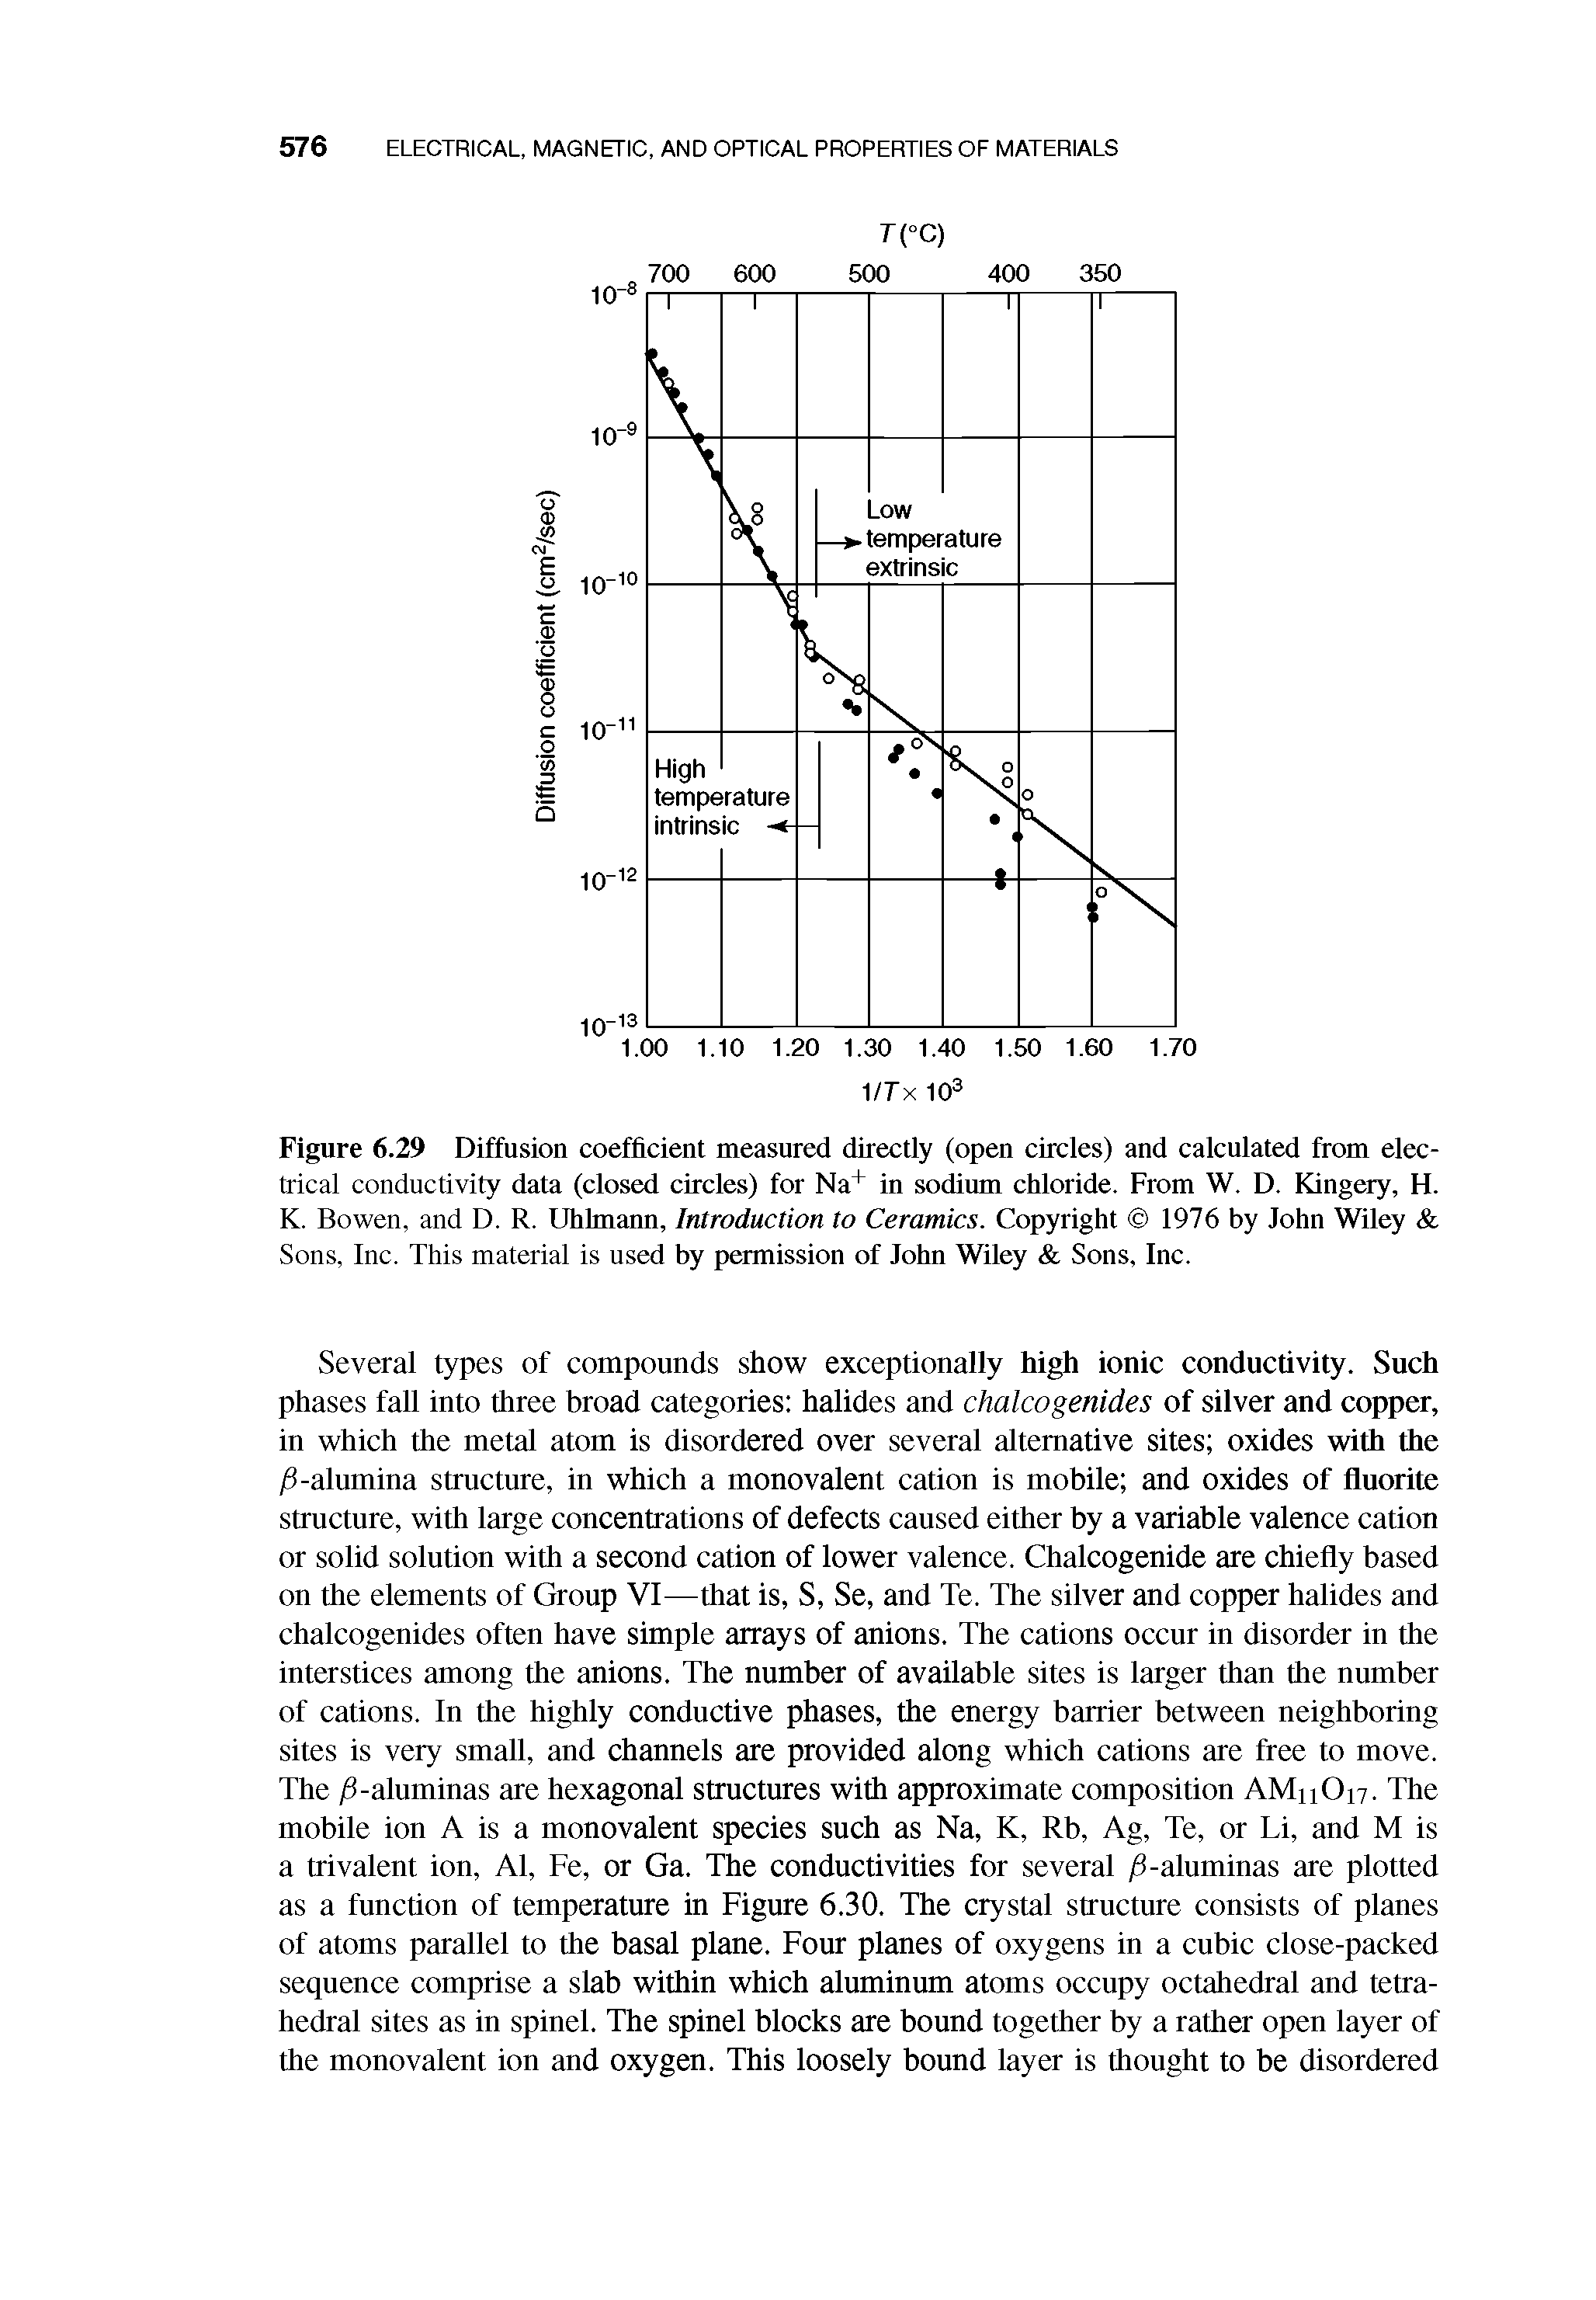 Figure 6.29 Diffusion coefficient measured directly (open circles) and calculated from electrical conductivity data (closed circles) for Na+ in sodium chloride. From W. D. Kingery, H. K. Bowen, and D. R. Uhhnann, Introduction to Ceramics. Copyright 1976 by John Wiley Sons, Inc. This material is used by permission of John Wiley Sons, Inc.